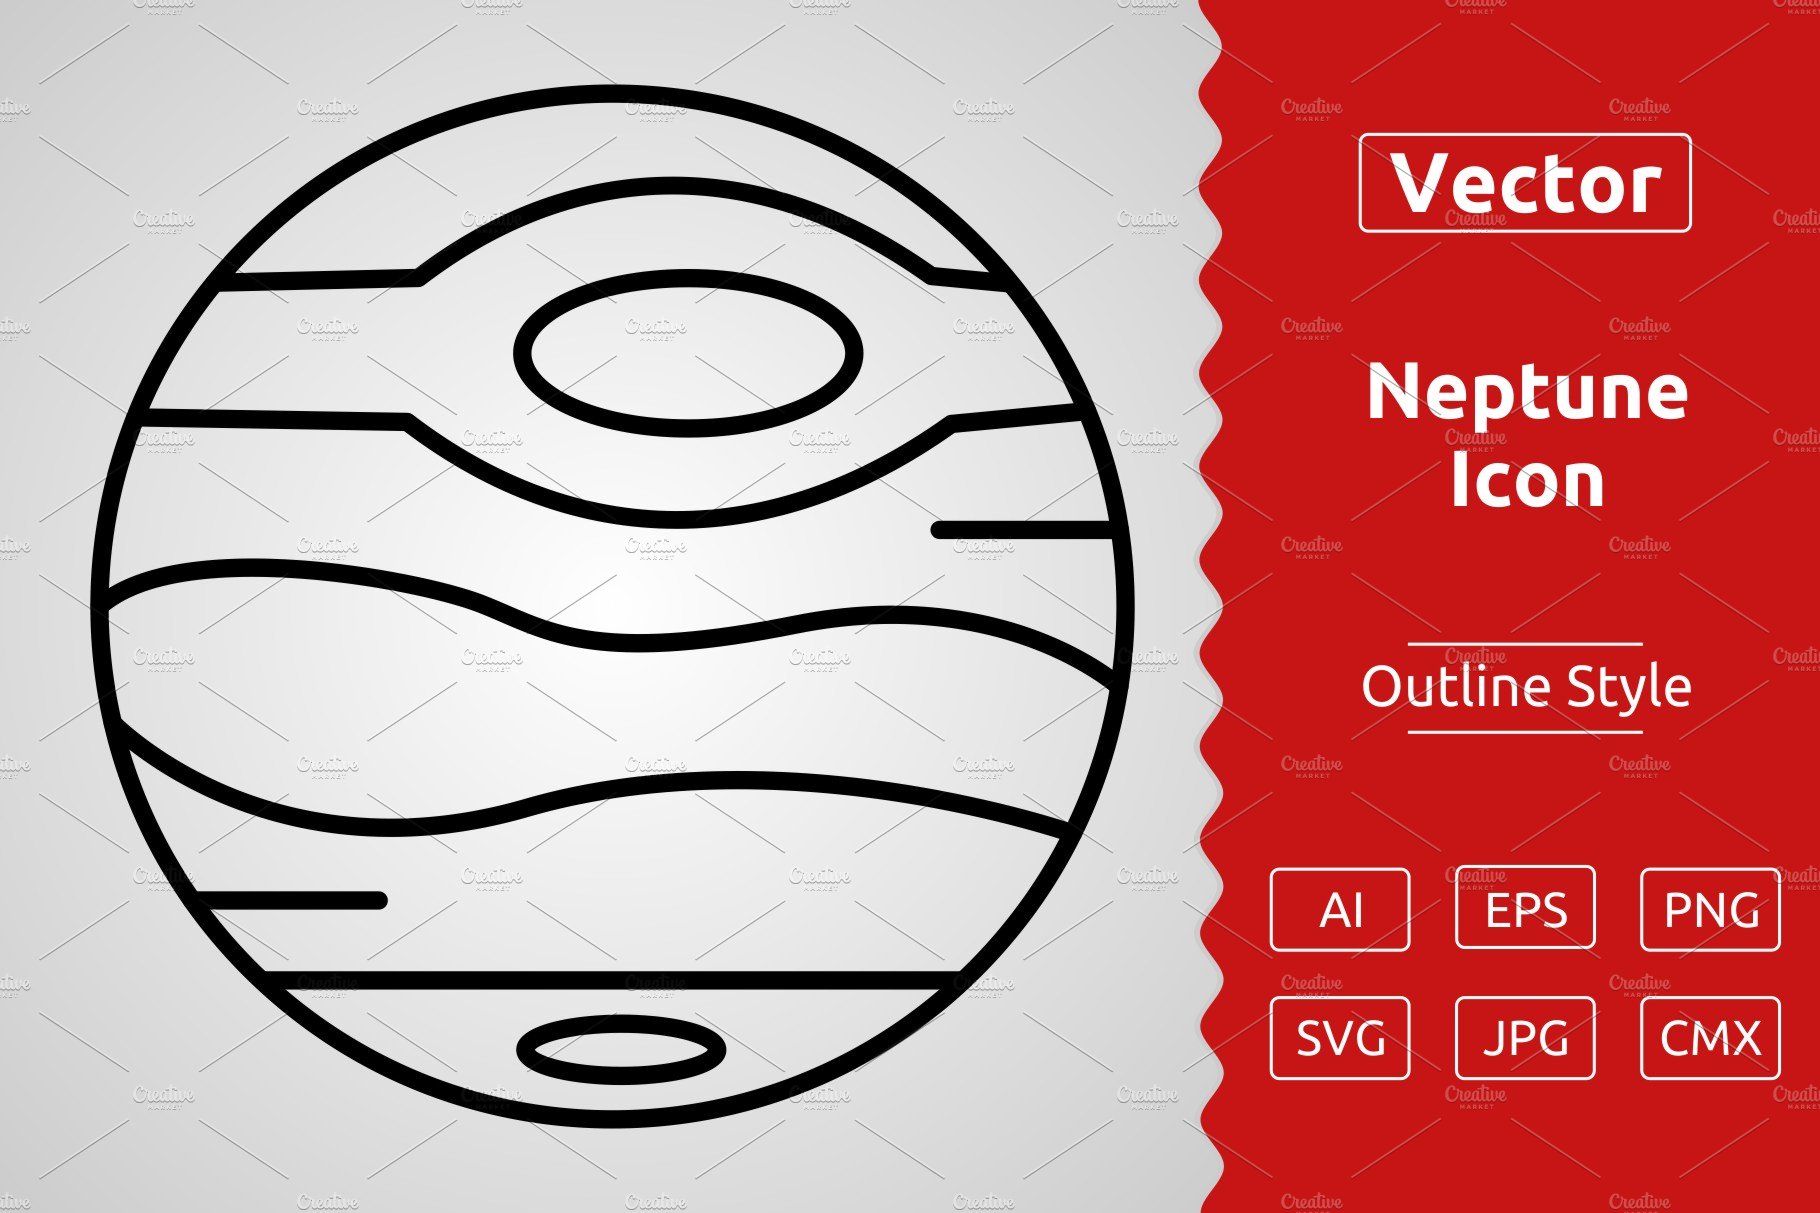 Vector Neptune Outline Icon cover image.